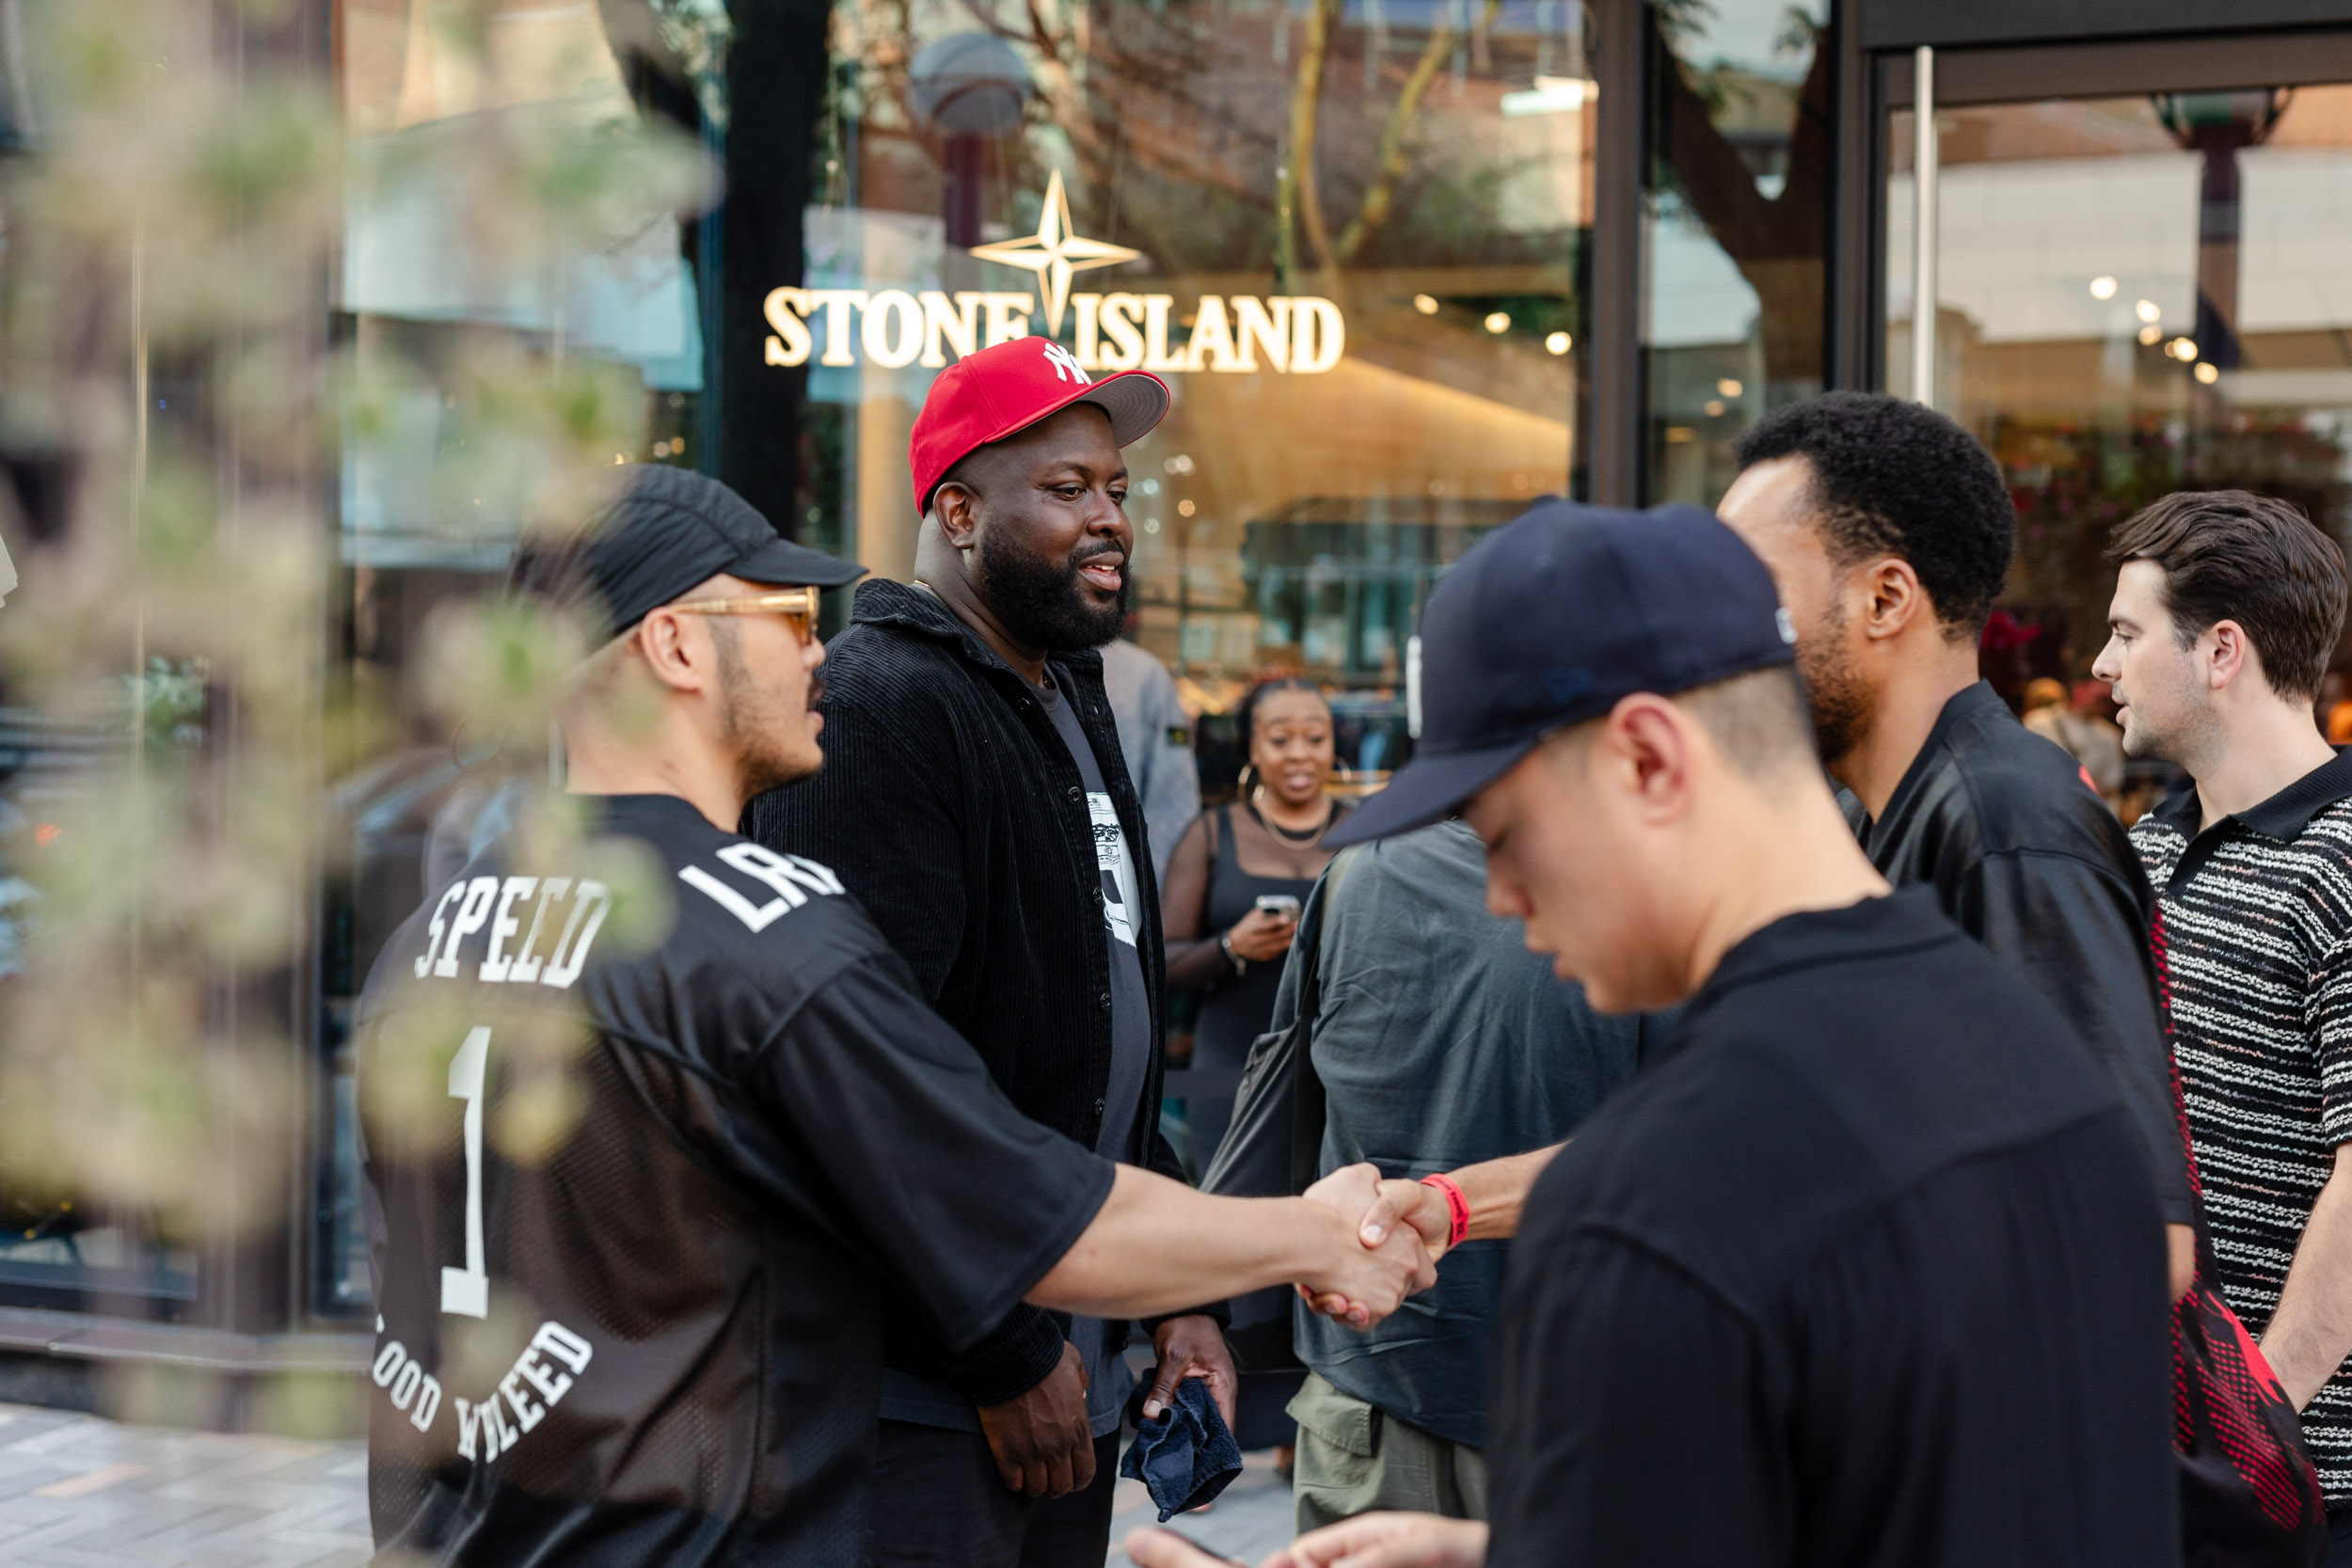 A group of men shaking hands in front of the Stone Island store